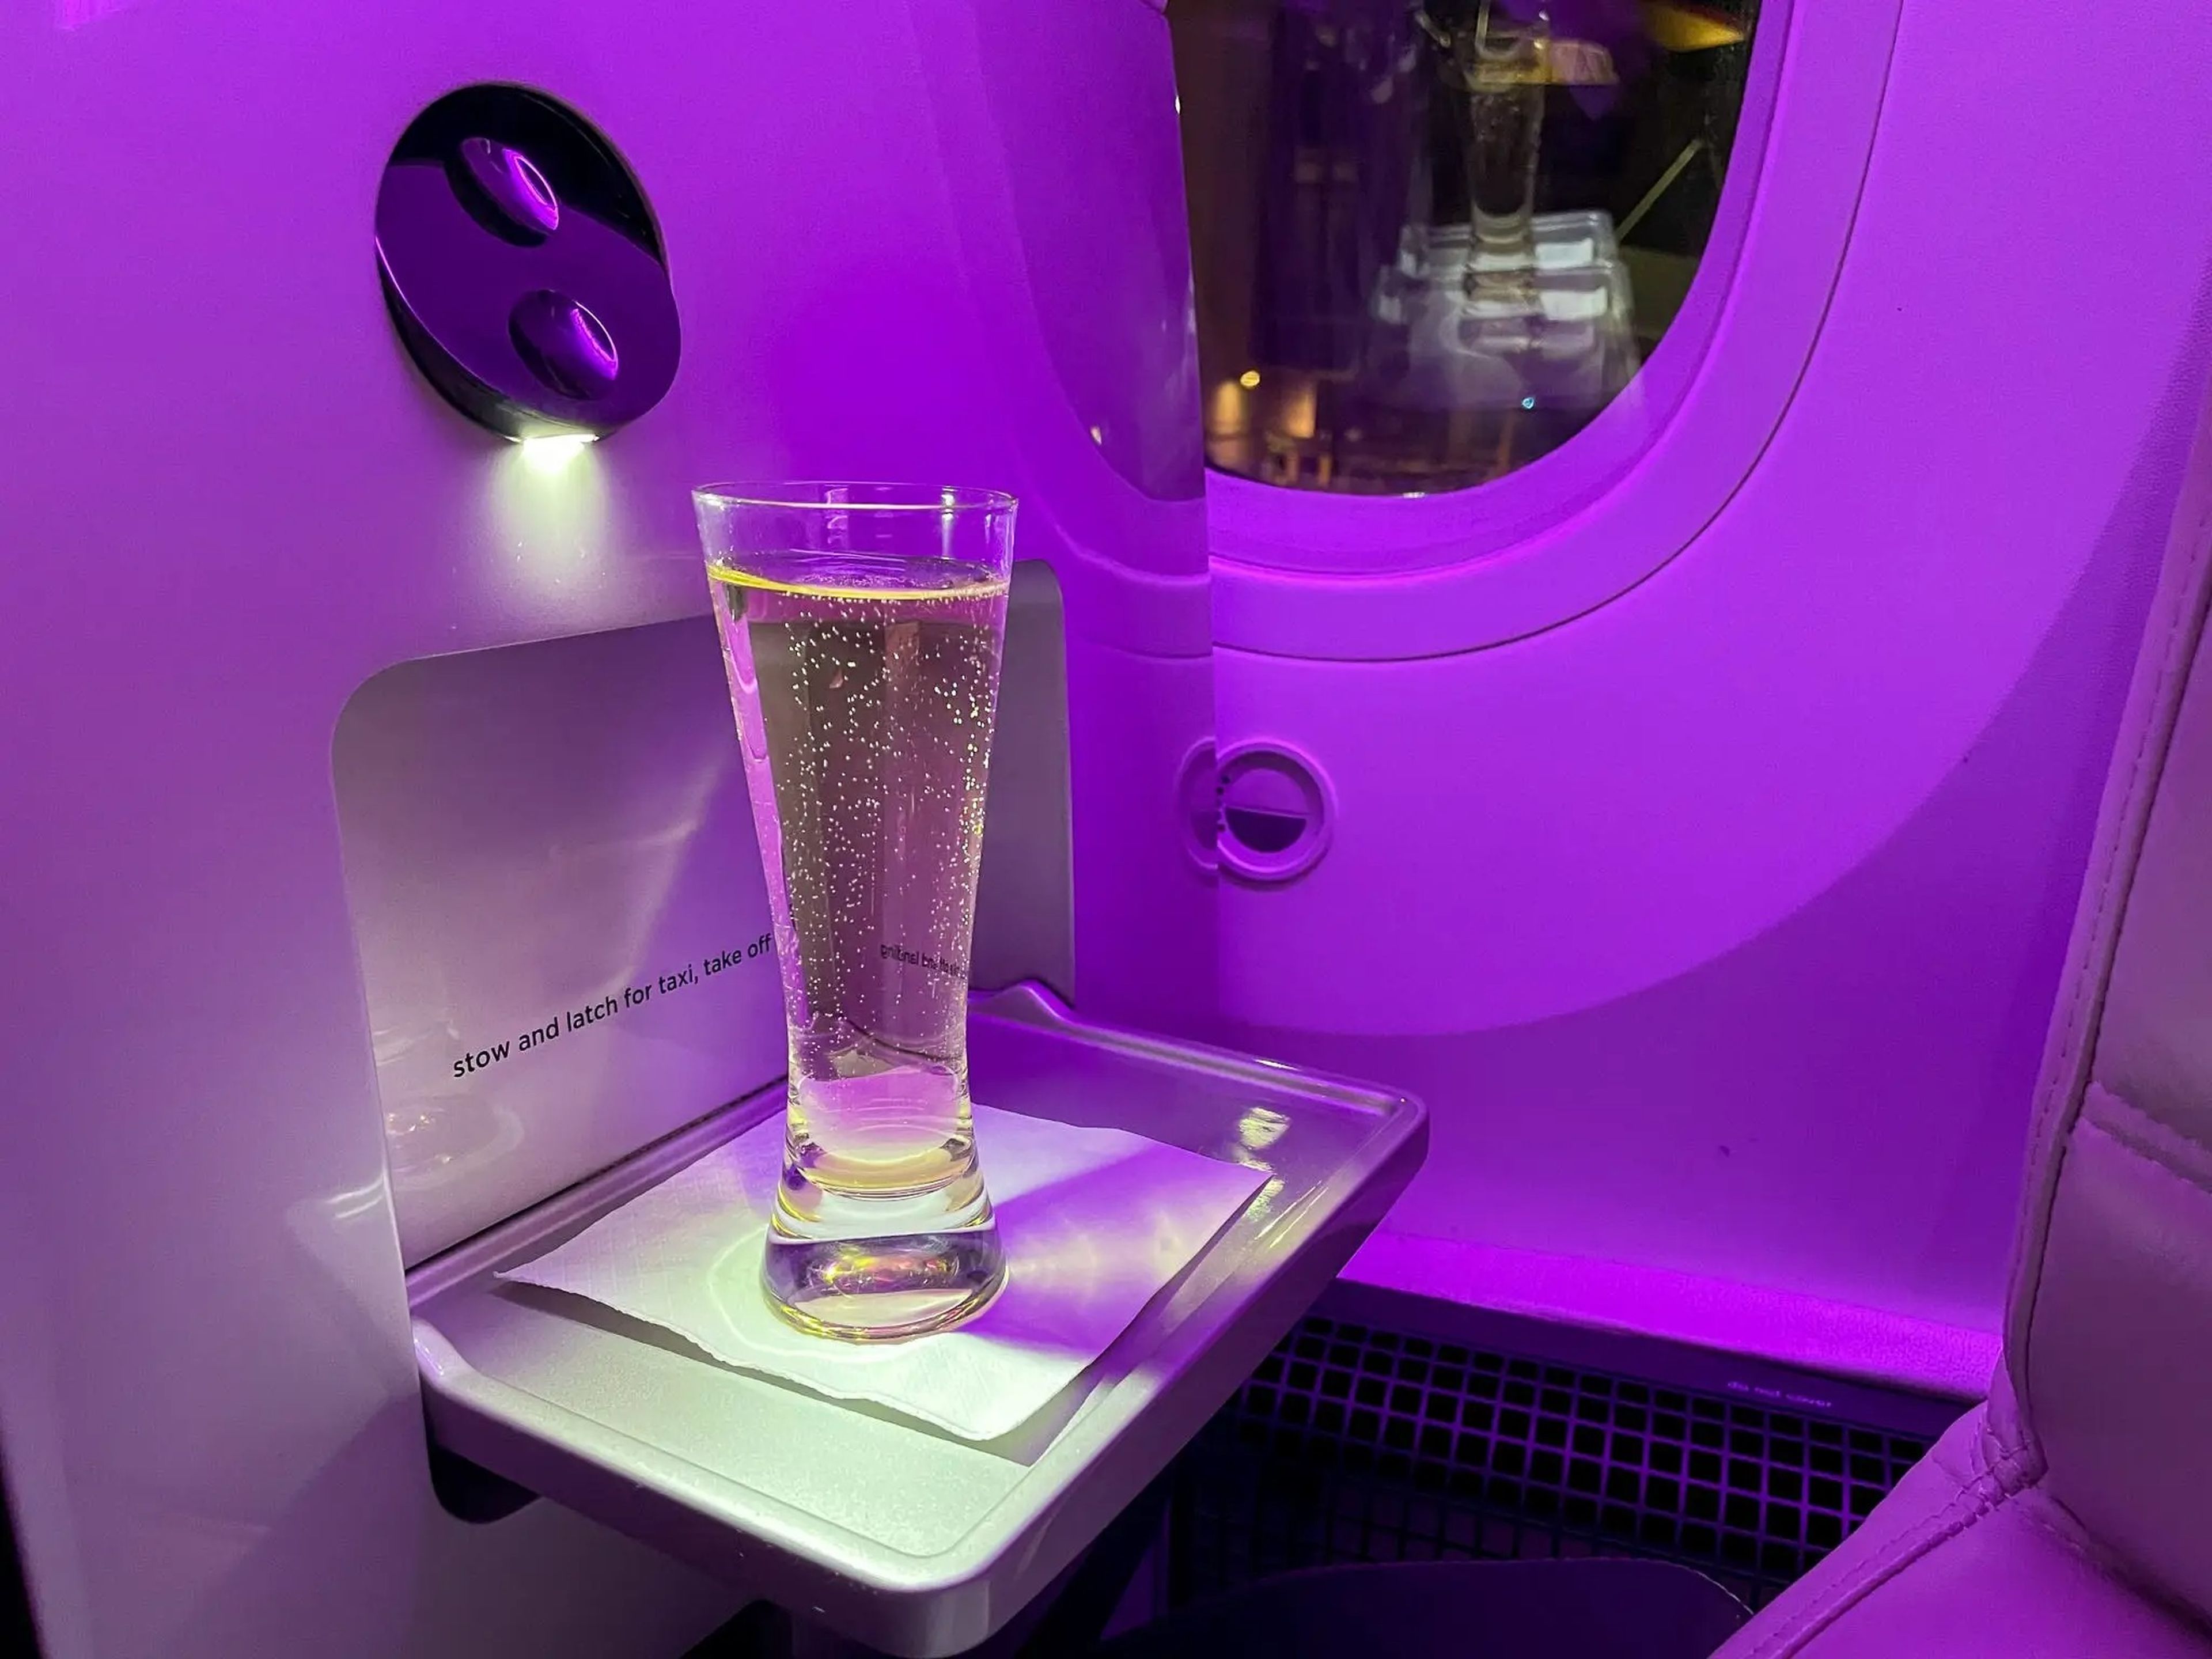 A glass of Champagne at the author's business-class seat.